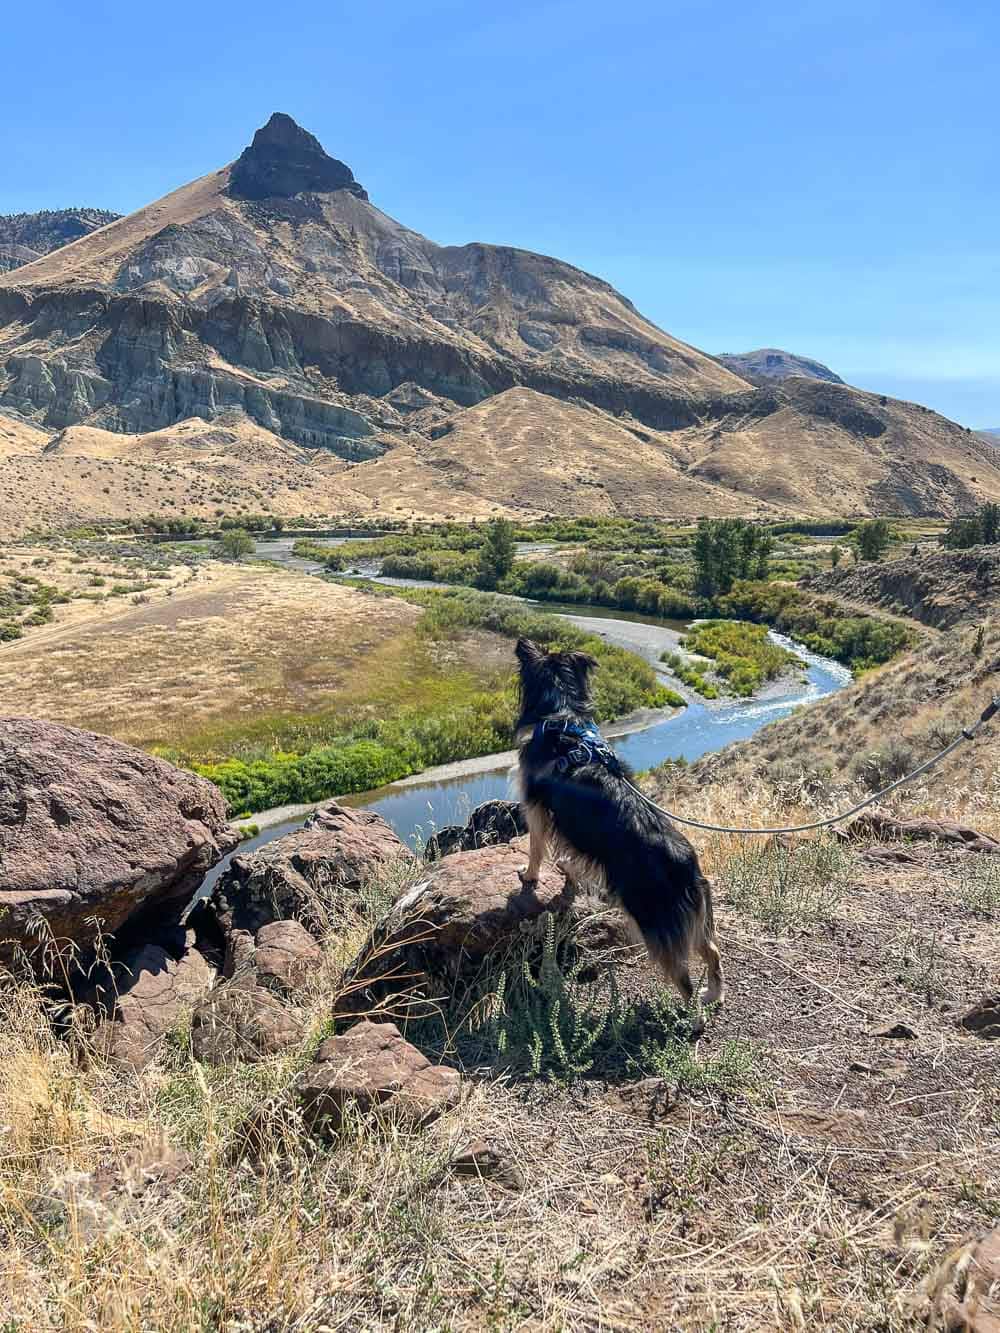 Dog on the Sheep Rock Overlook Trail at Sheep Rock Unit, John Day Fossil Beds National Monument